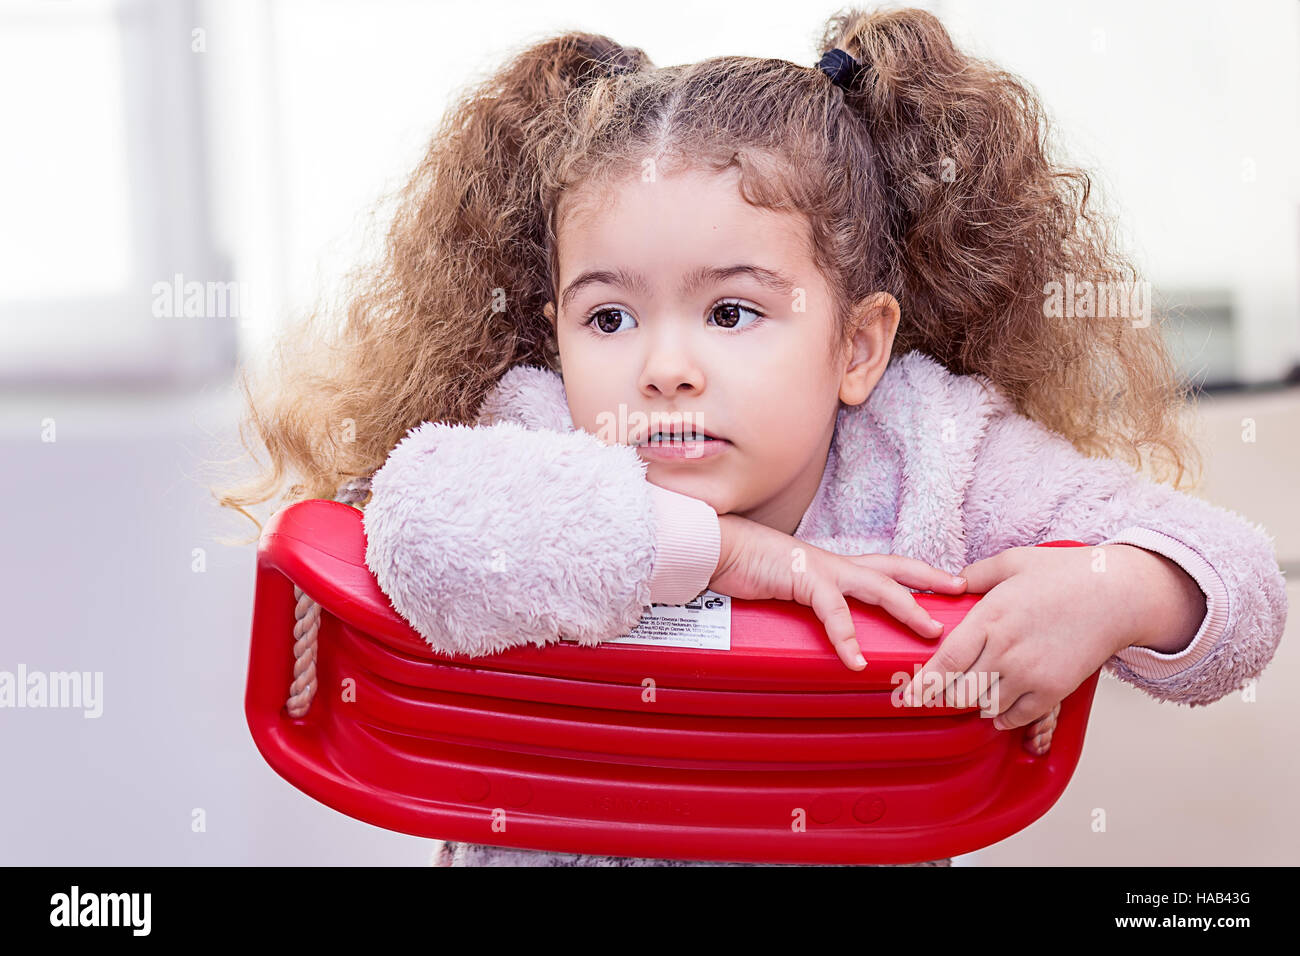 2. Adorable Toddler Girl with Curly Blonde Hair - wide 9